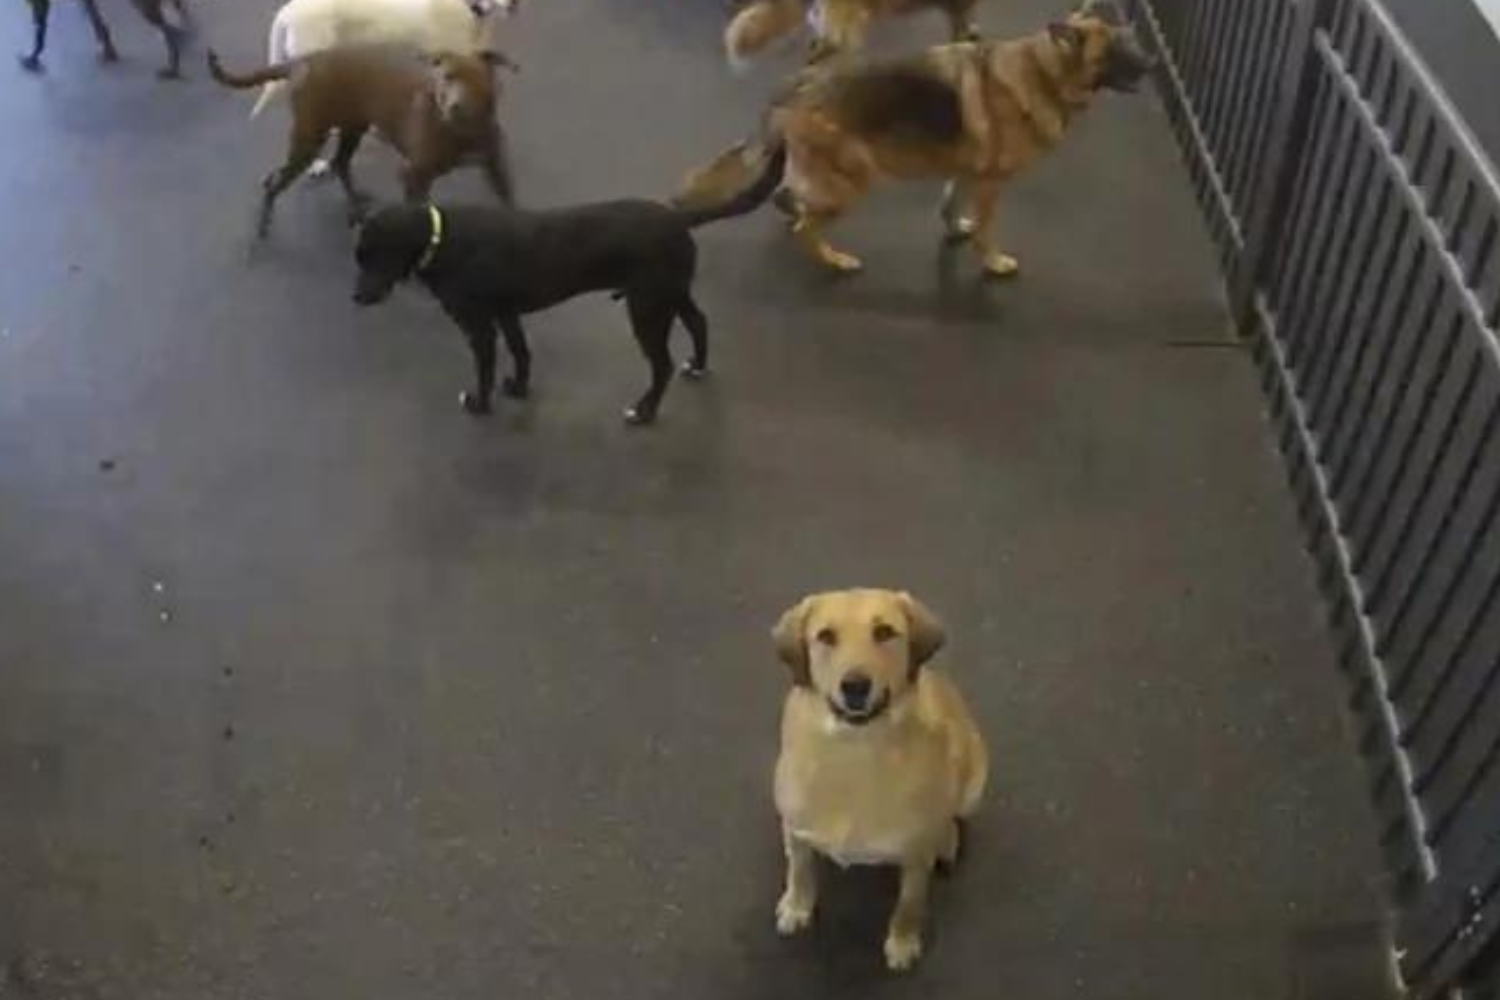 'Pick Me Up:' Owner Discovers Dog Staring at Camera at Doggy Day Care ...